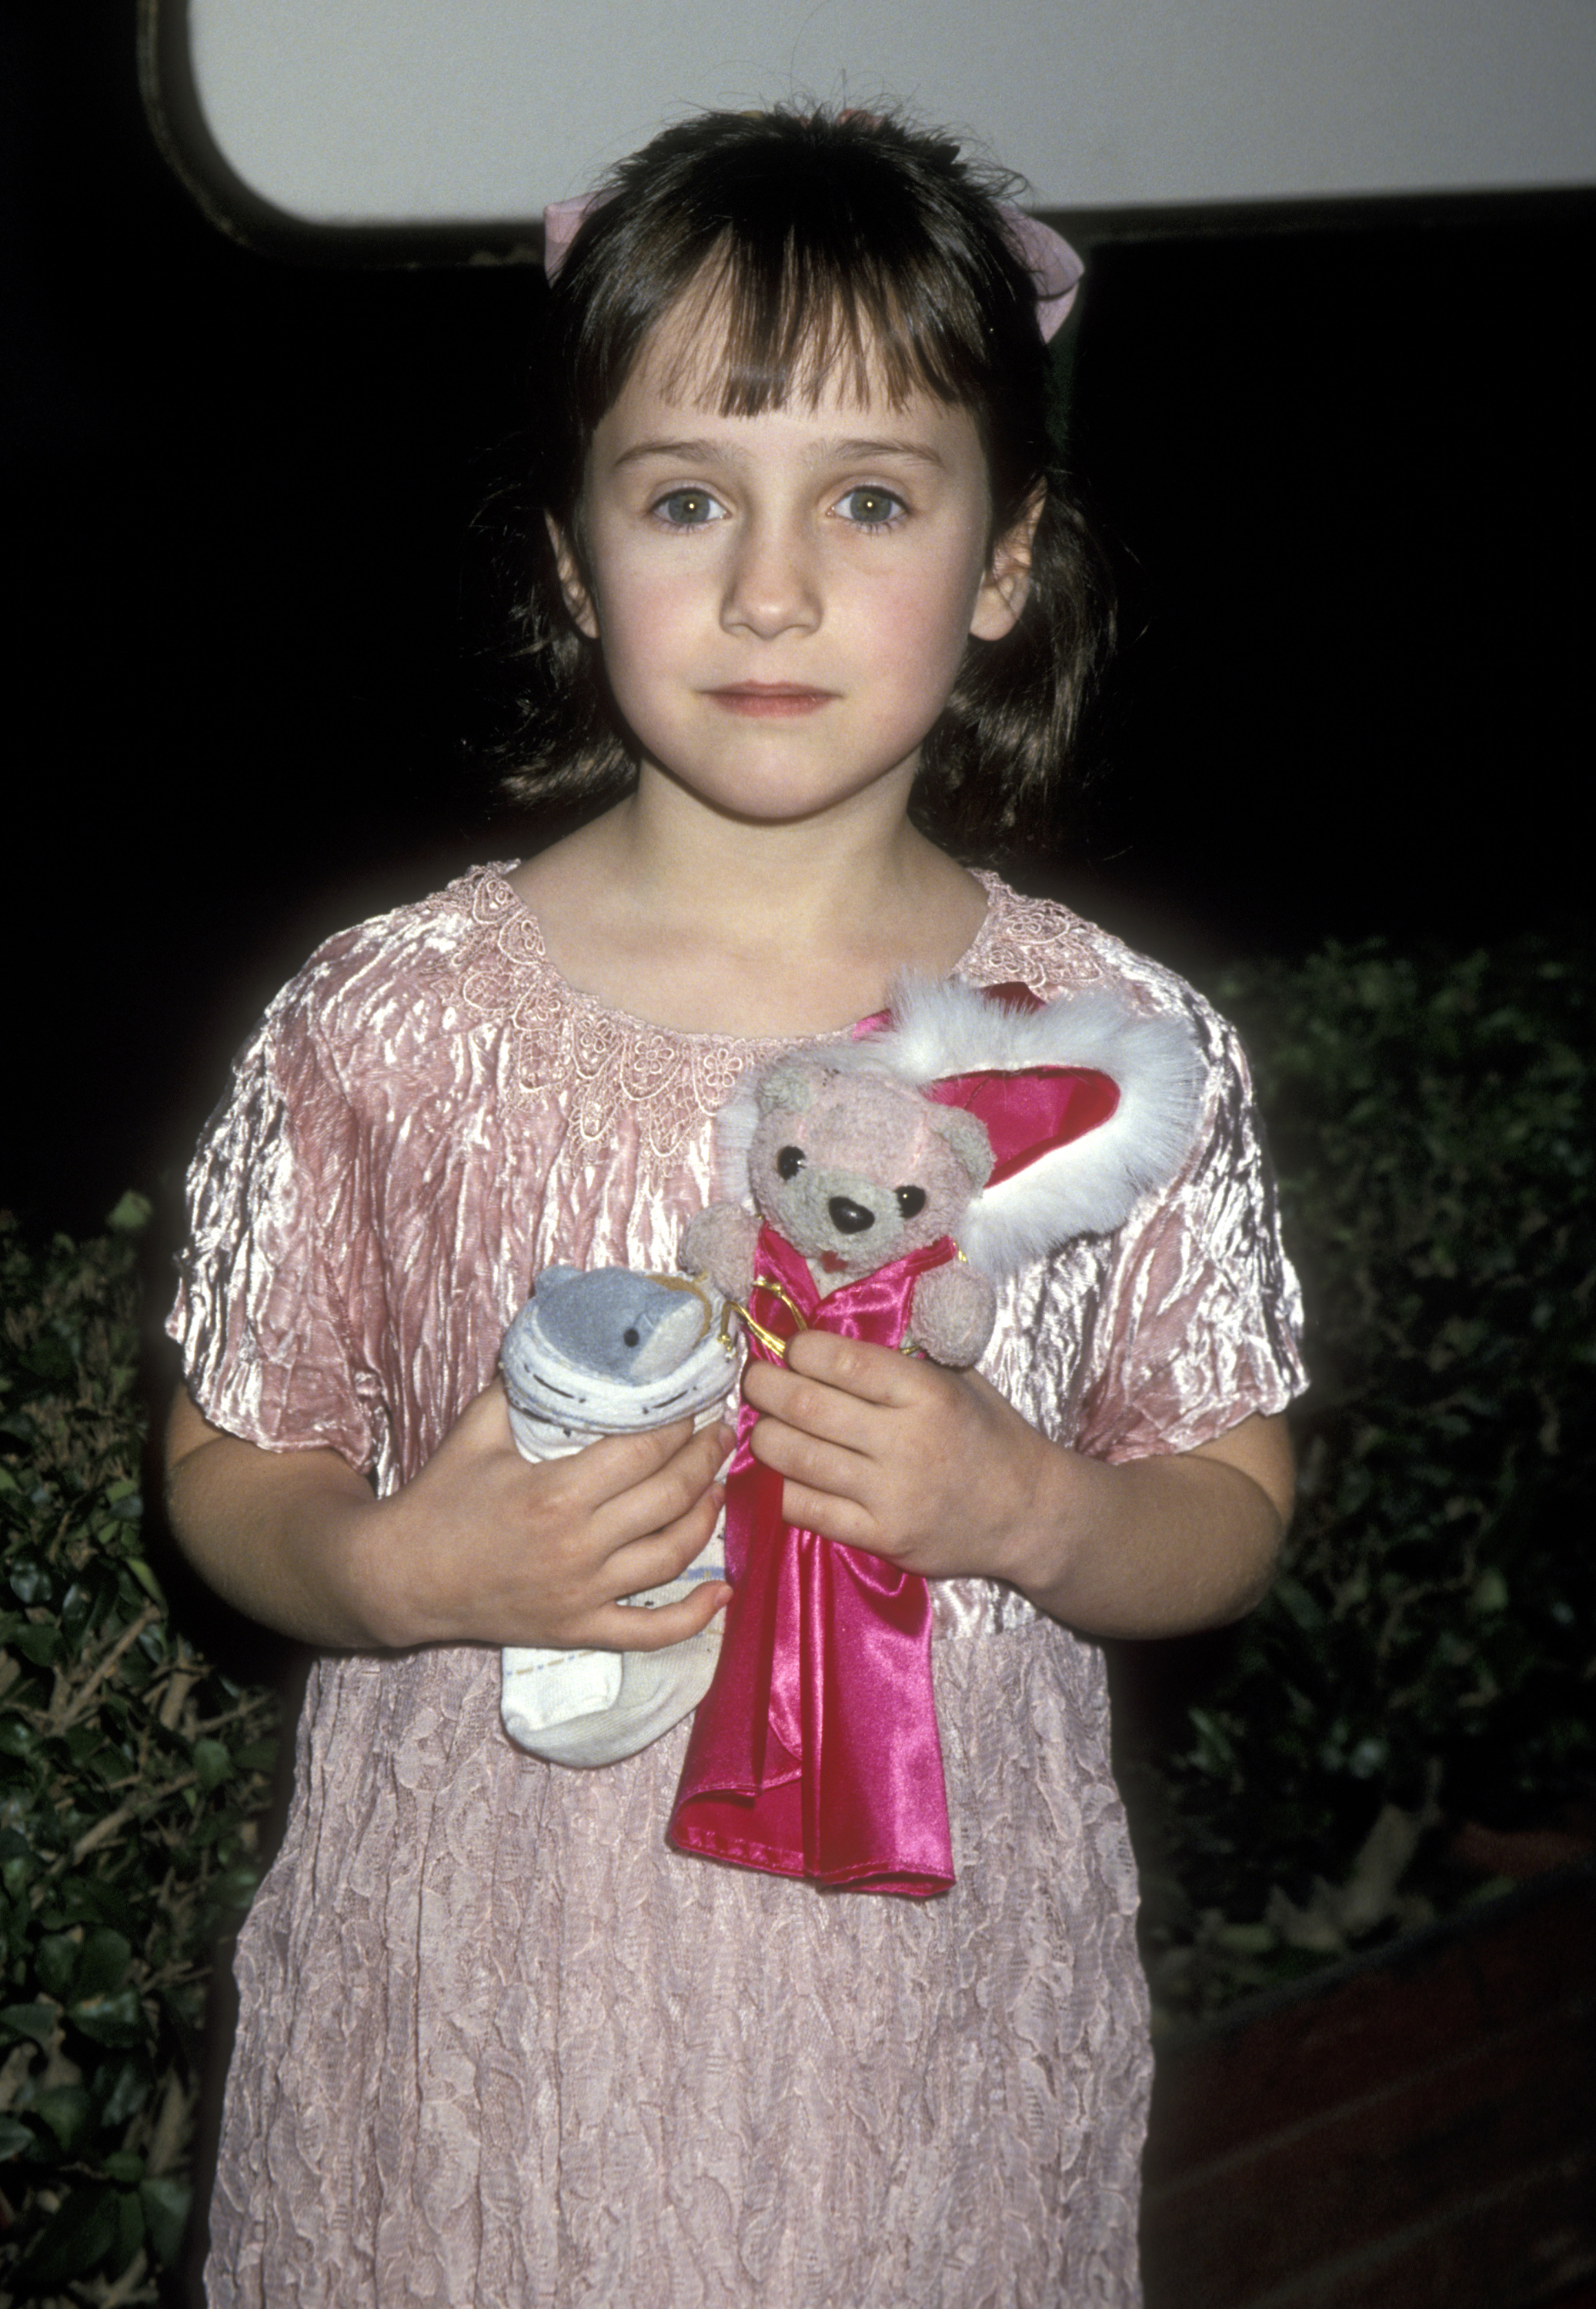 Mara Wilson attends the 52nd Annual Golden Globe Awards at Beverly Hilton Hotel in Beverly Hills, California, on January 21, 1995. | Source: Getty Images